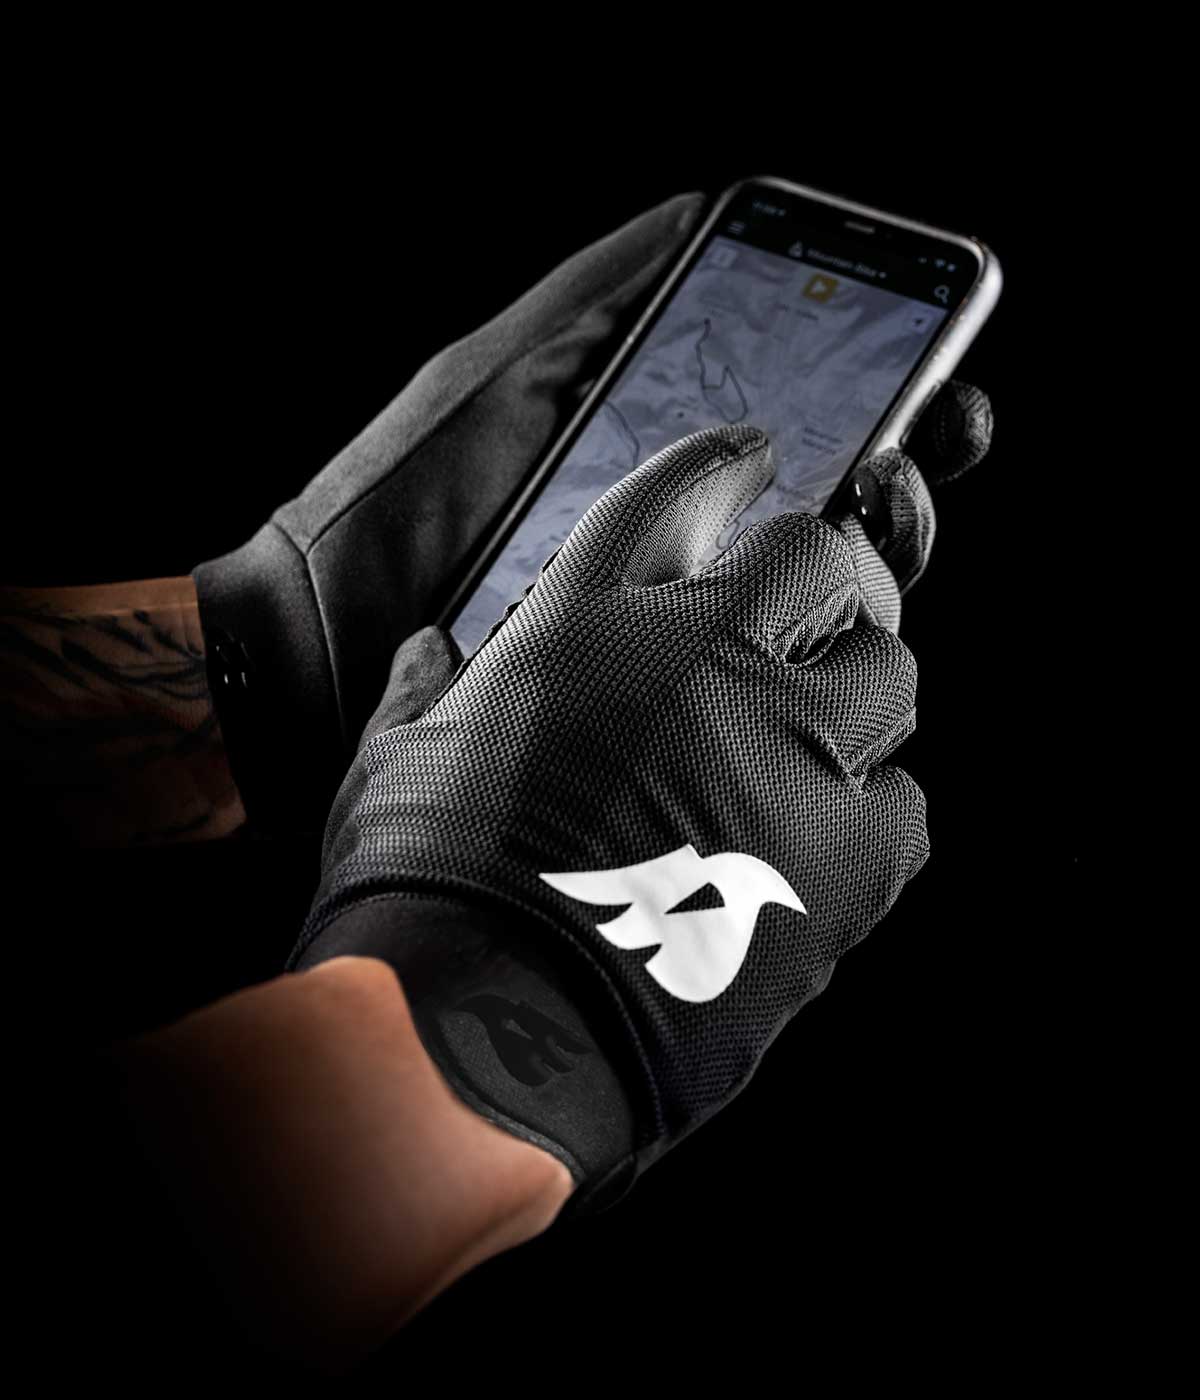 bluegrass union mtb gloves touchscreen use compatible